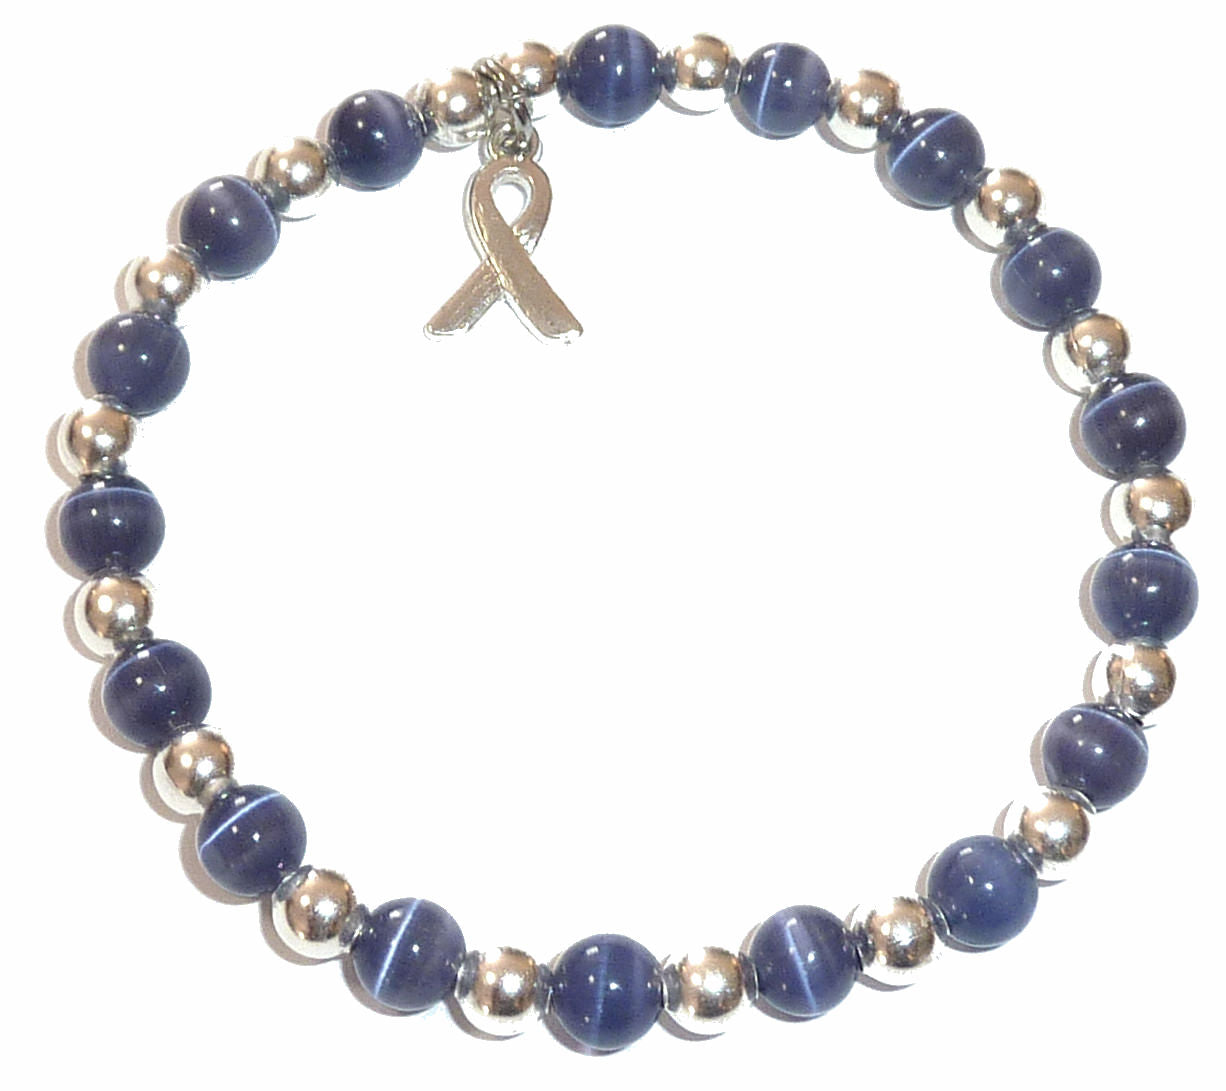 Periwinkle (Stomach cancer) Packaged Cancer Awareness Bracelet 6mm - Stretch (will stretch to fit most Adults)